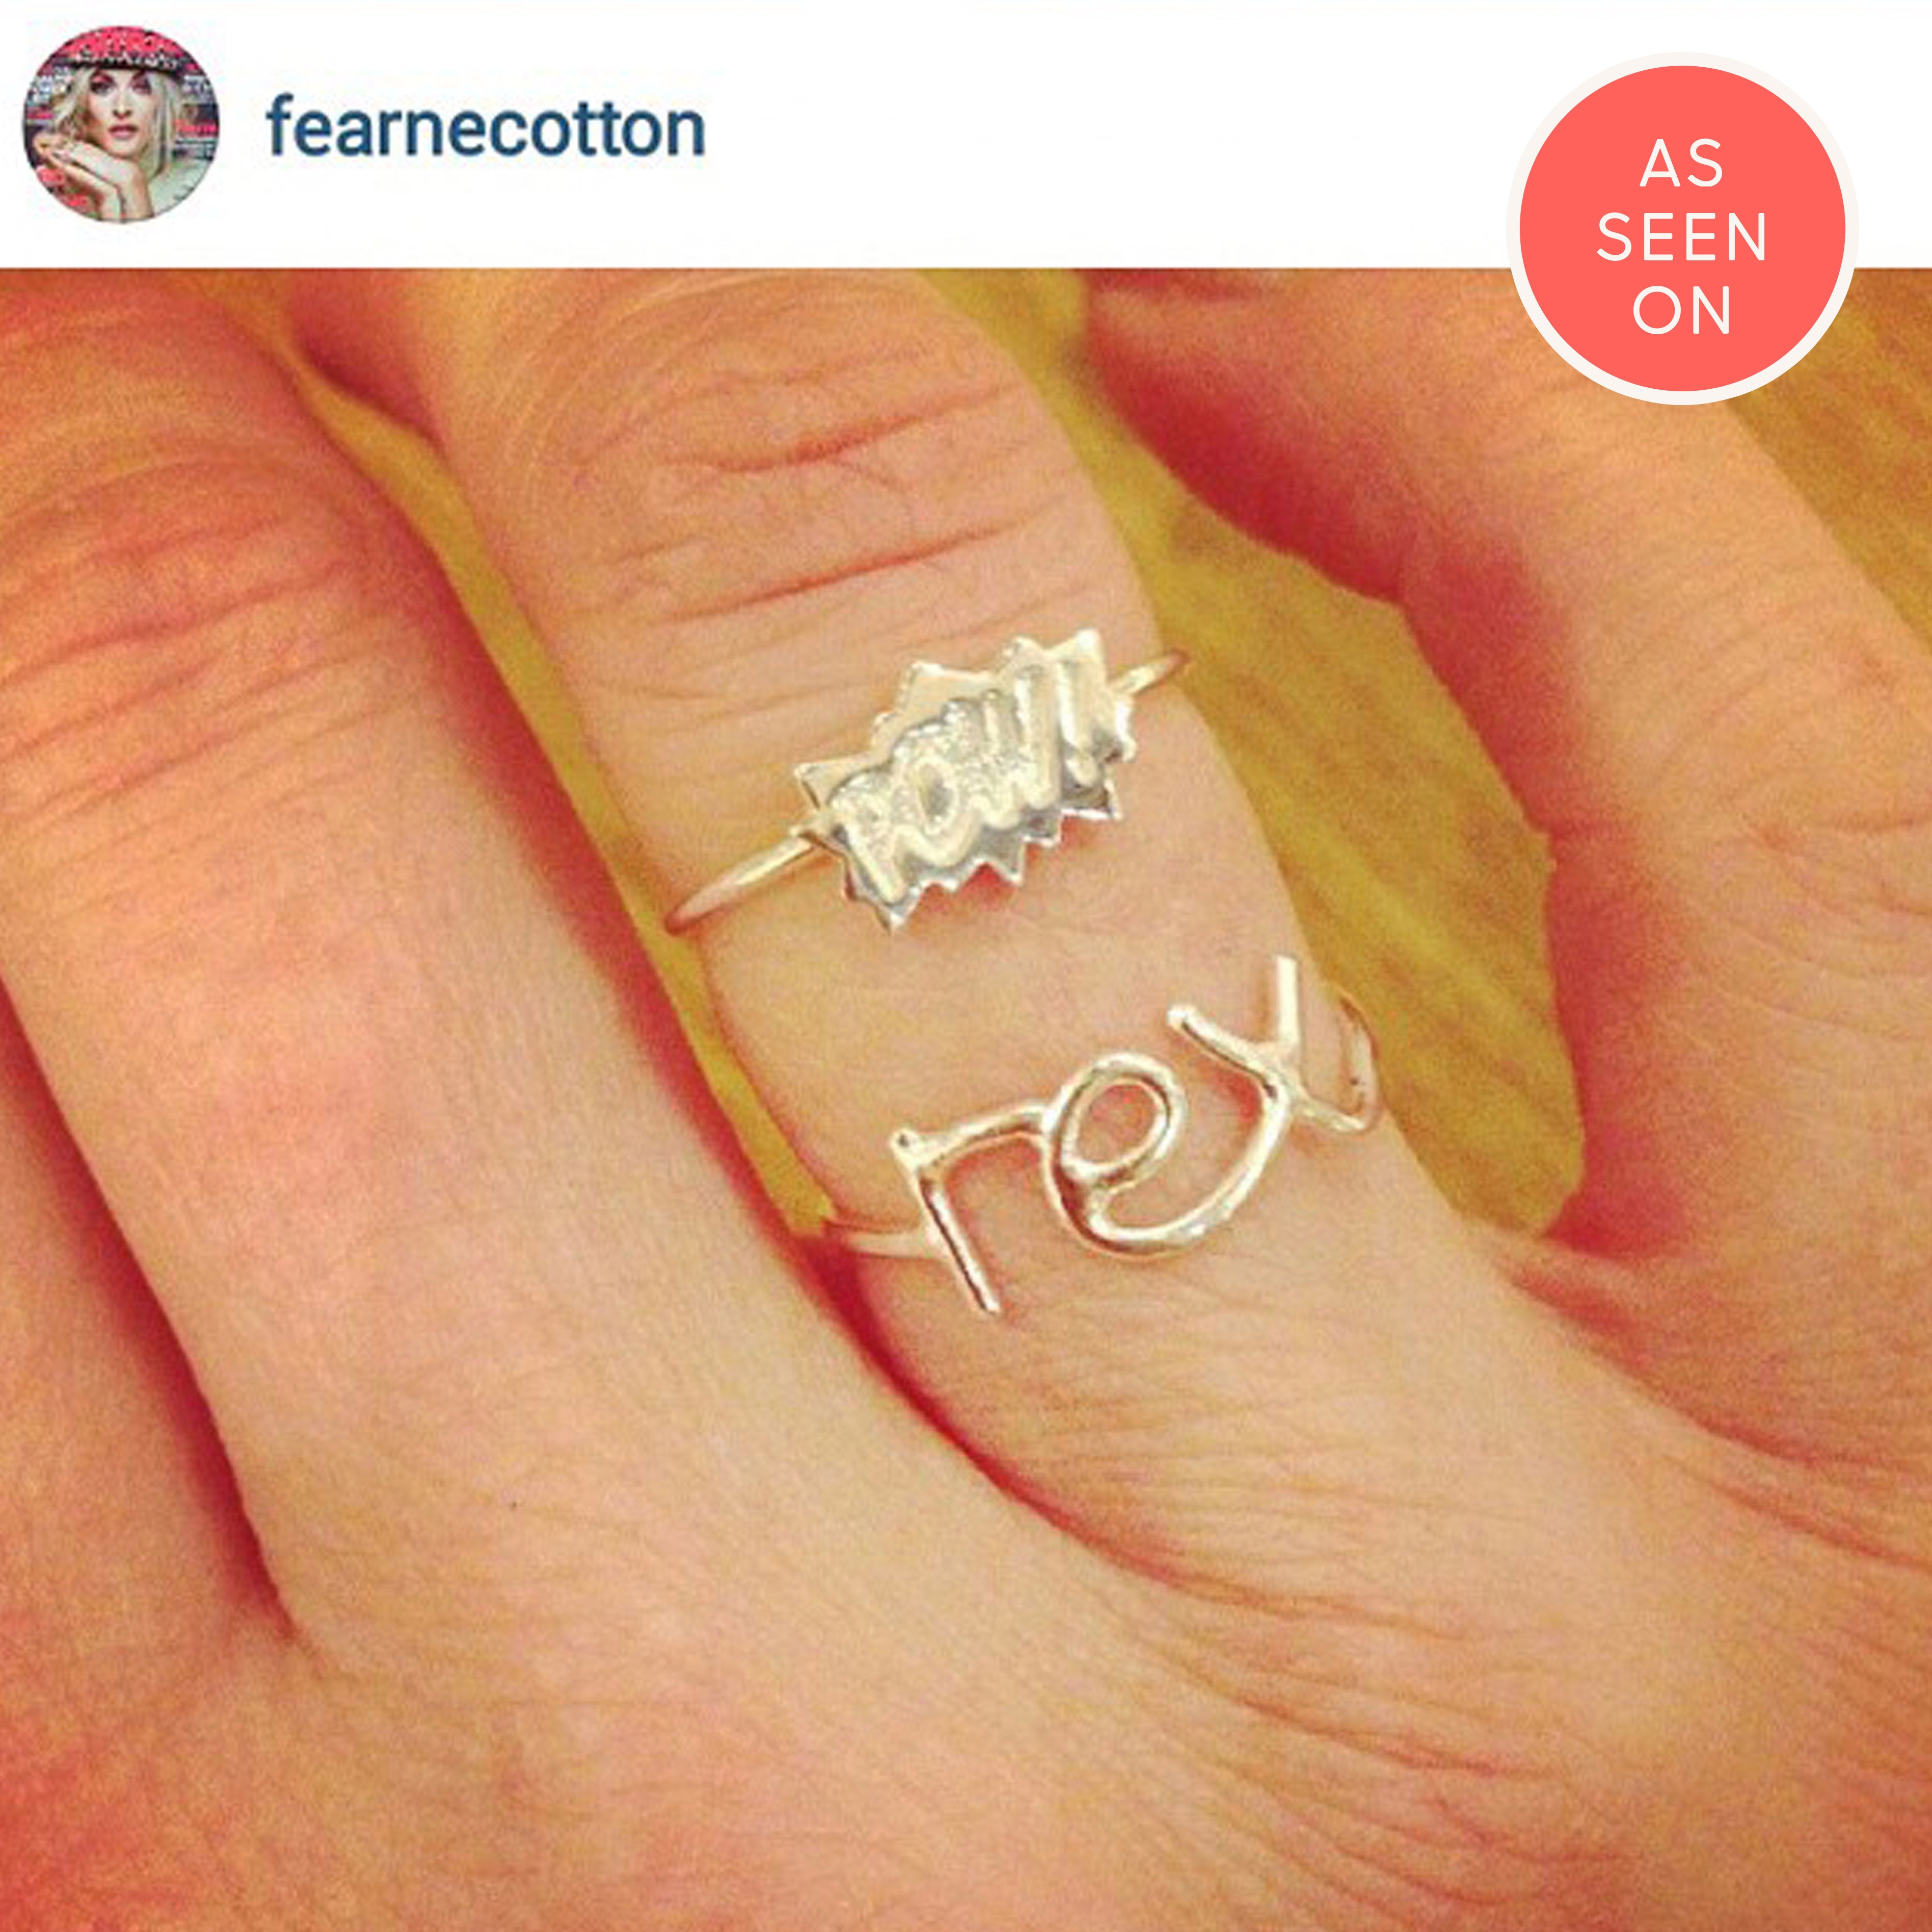 Fearne Cotton wears personalised rex ring in silver close-up